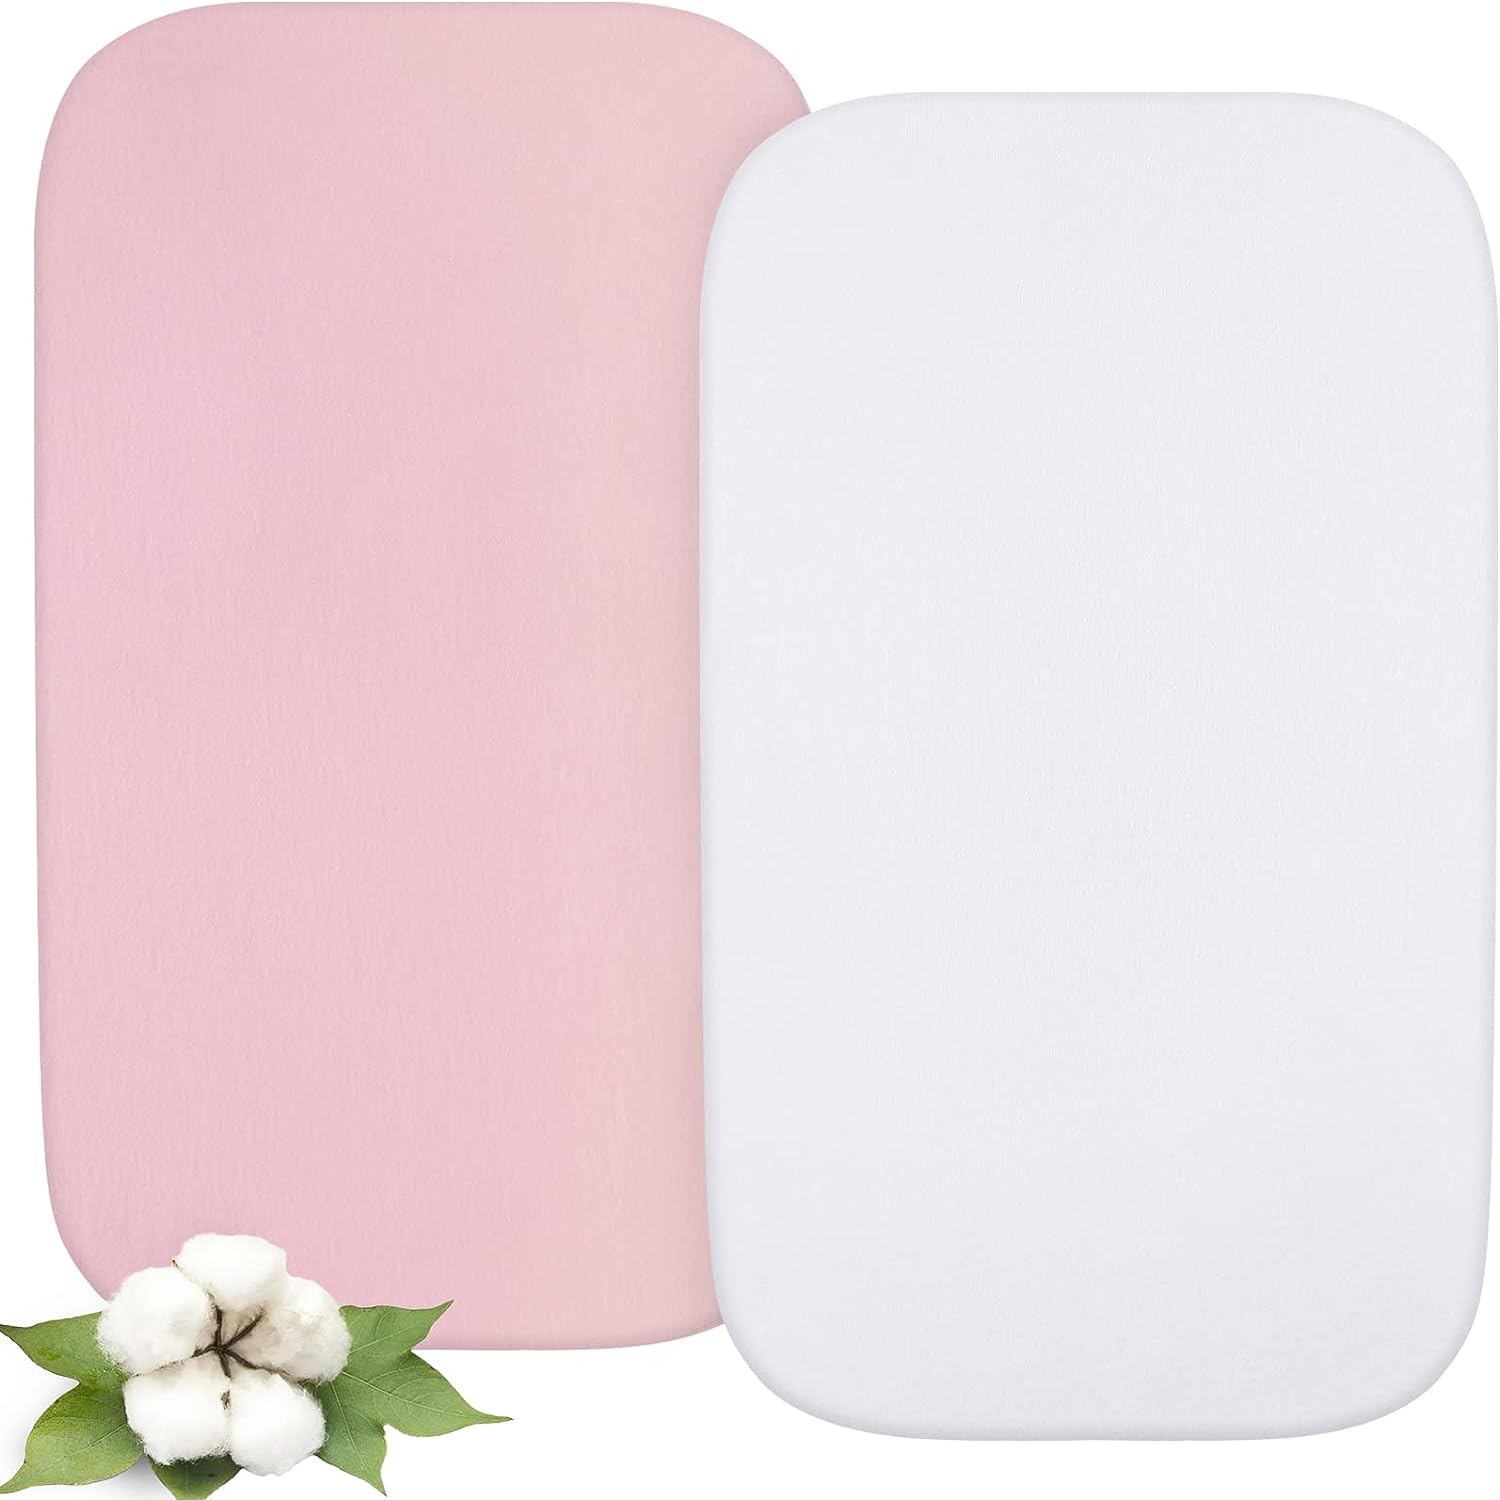 Bassinet Fitted Sheets compatible with Mika Micky Bedside Sleeper - 2 Pack, Cotton, Pink& White- Biloban online store